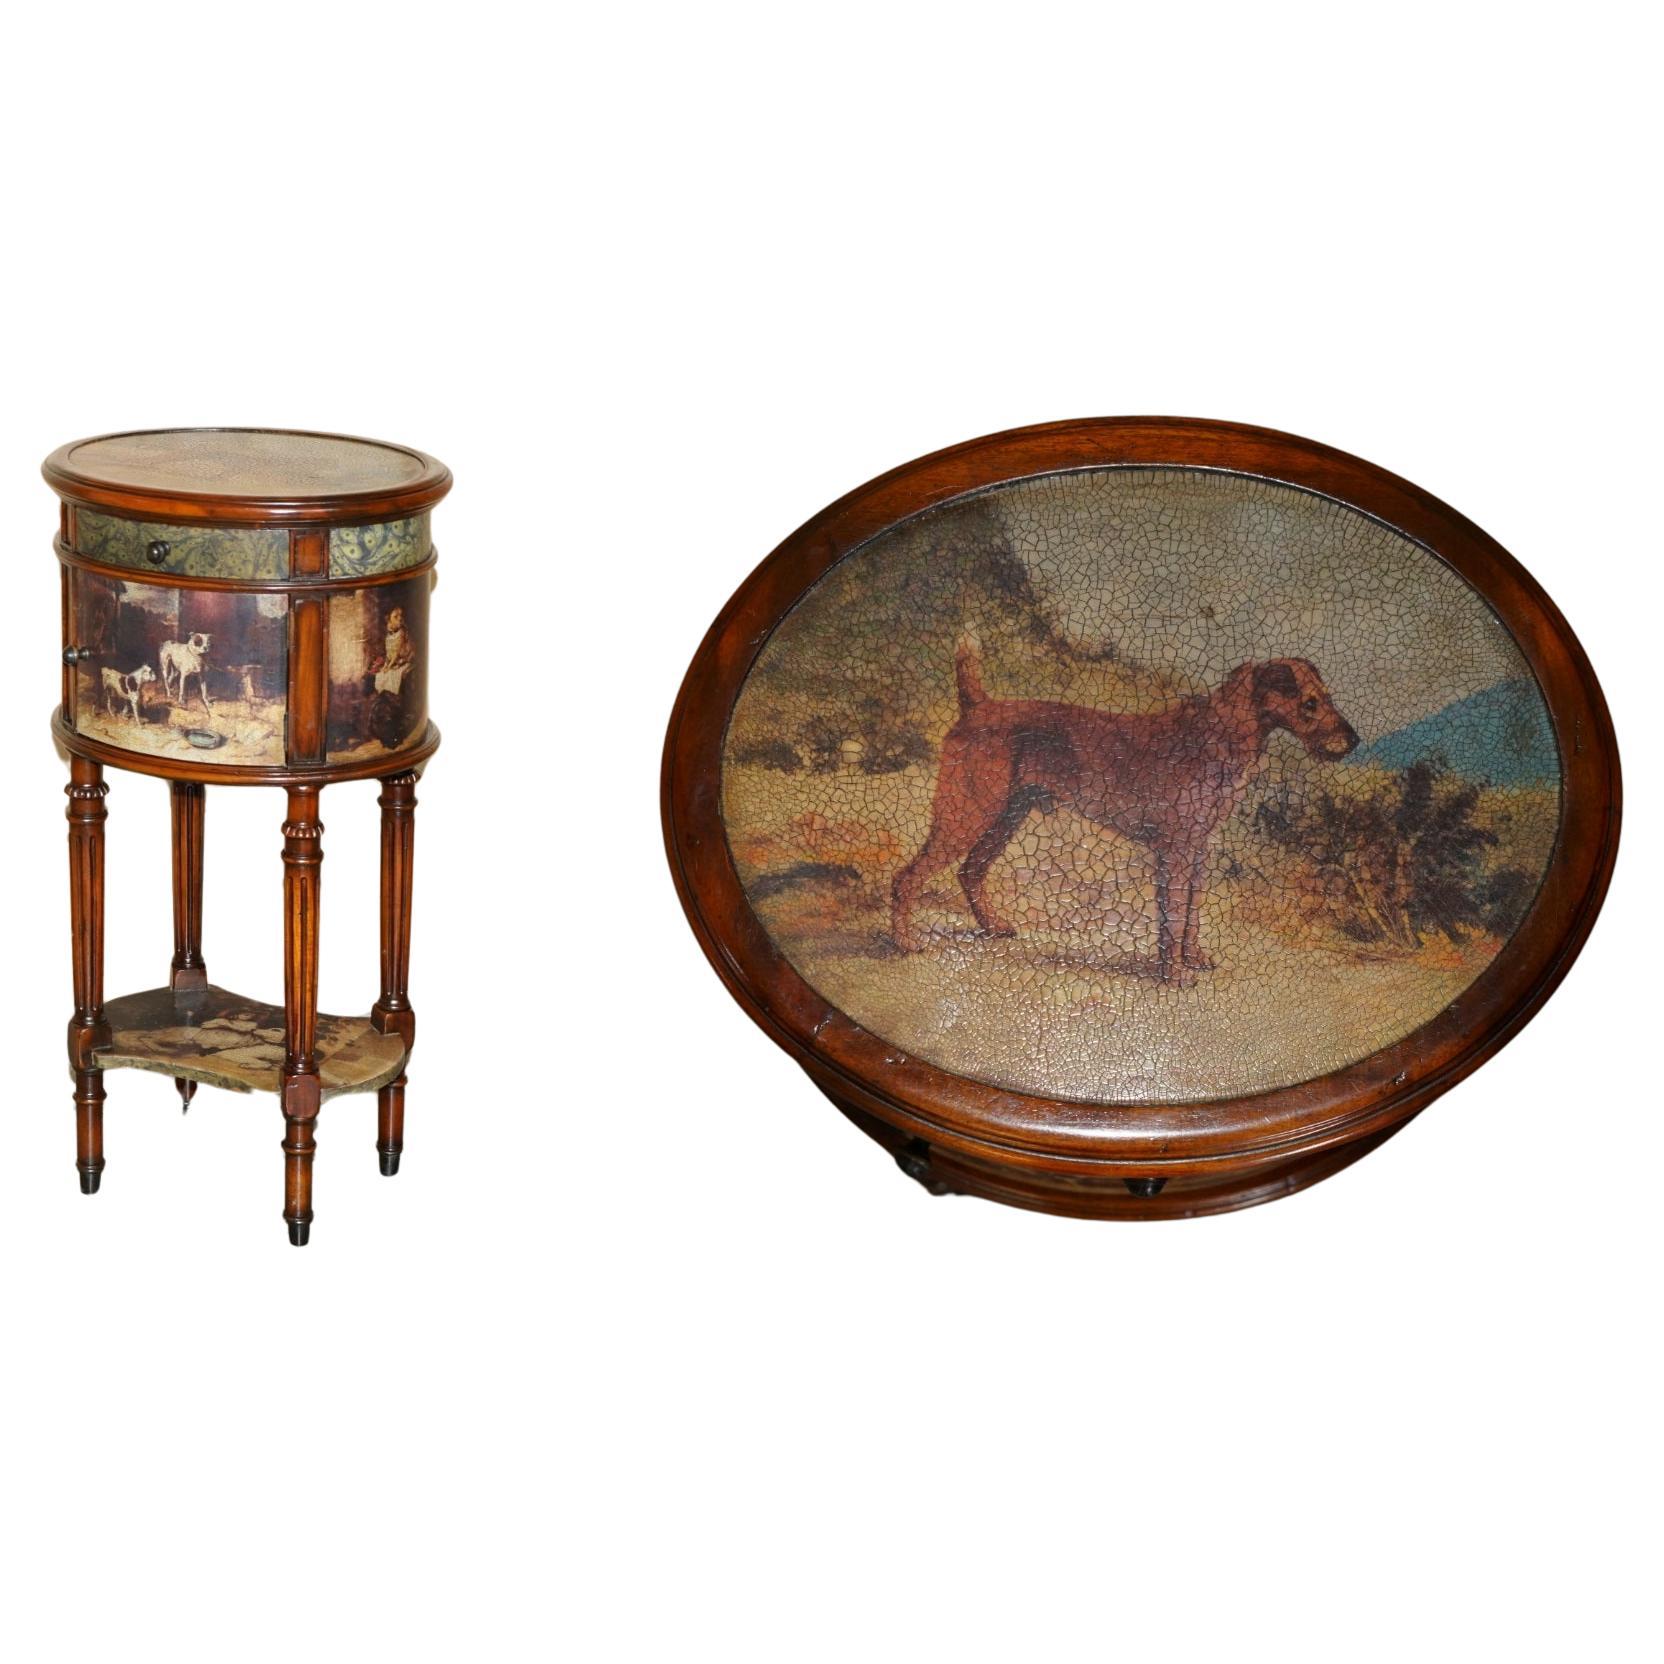 EXQUISITE TWO TIER TALL SiDE TABLE CABINET LEATHER CLADDED & PAINTED WITH DOGS For Sale